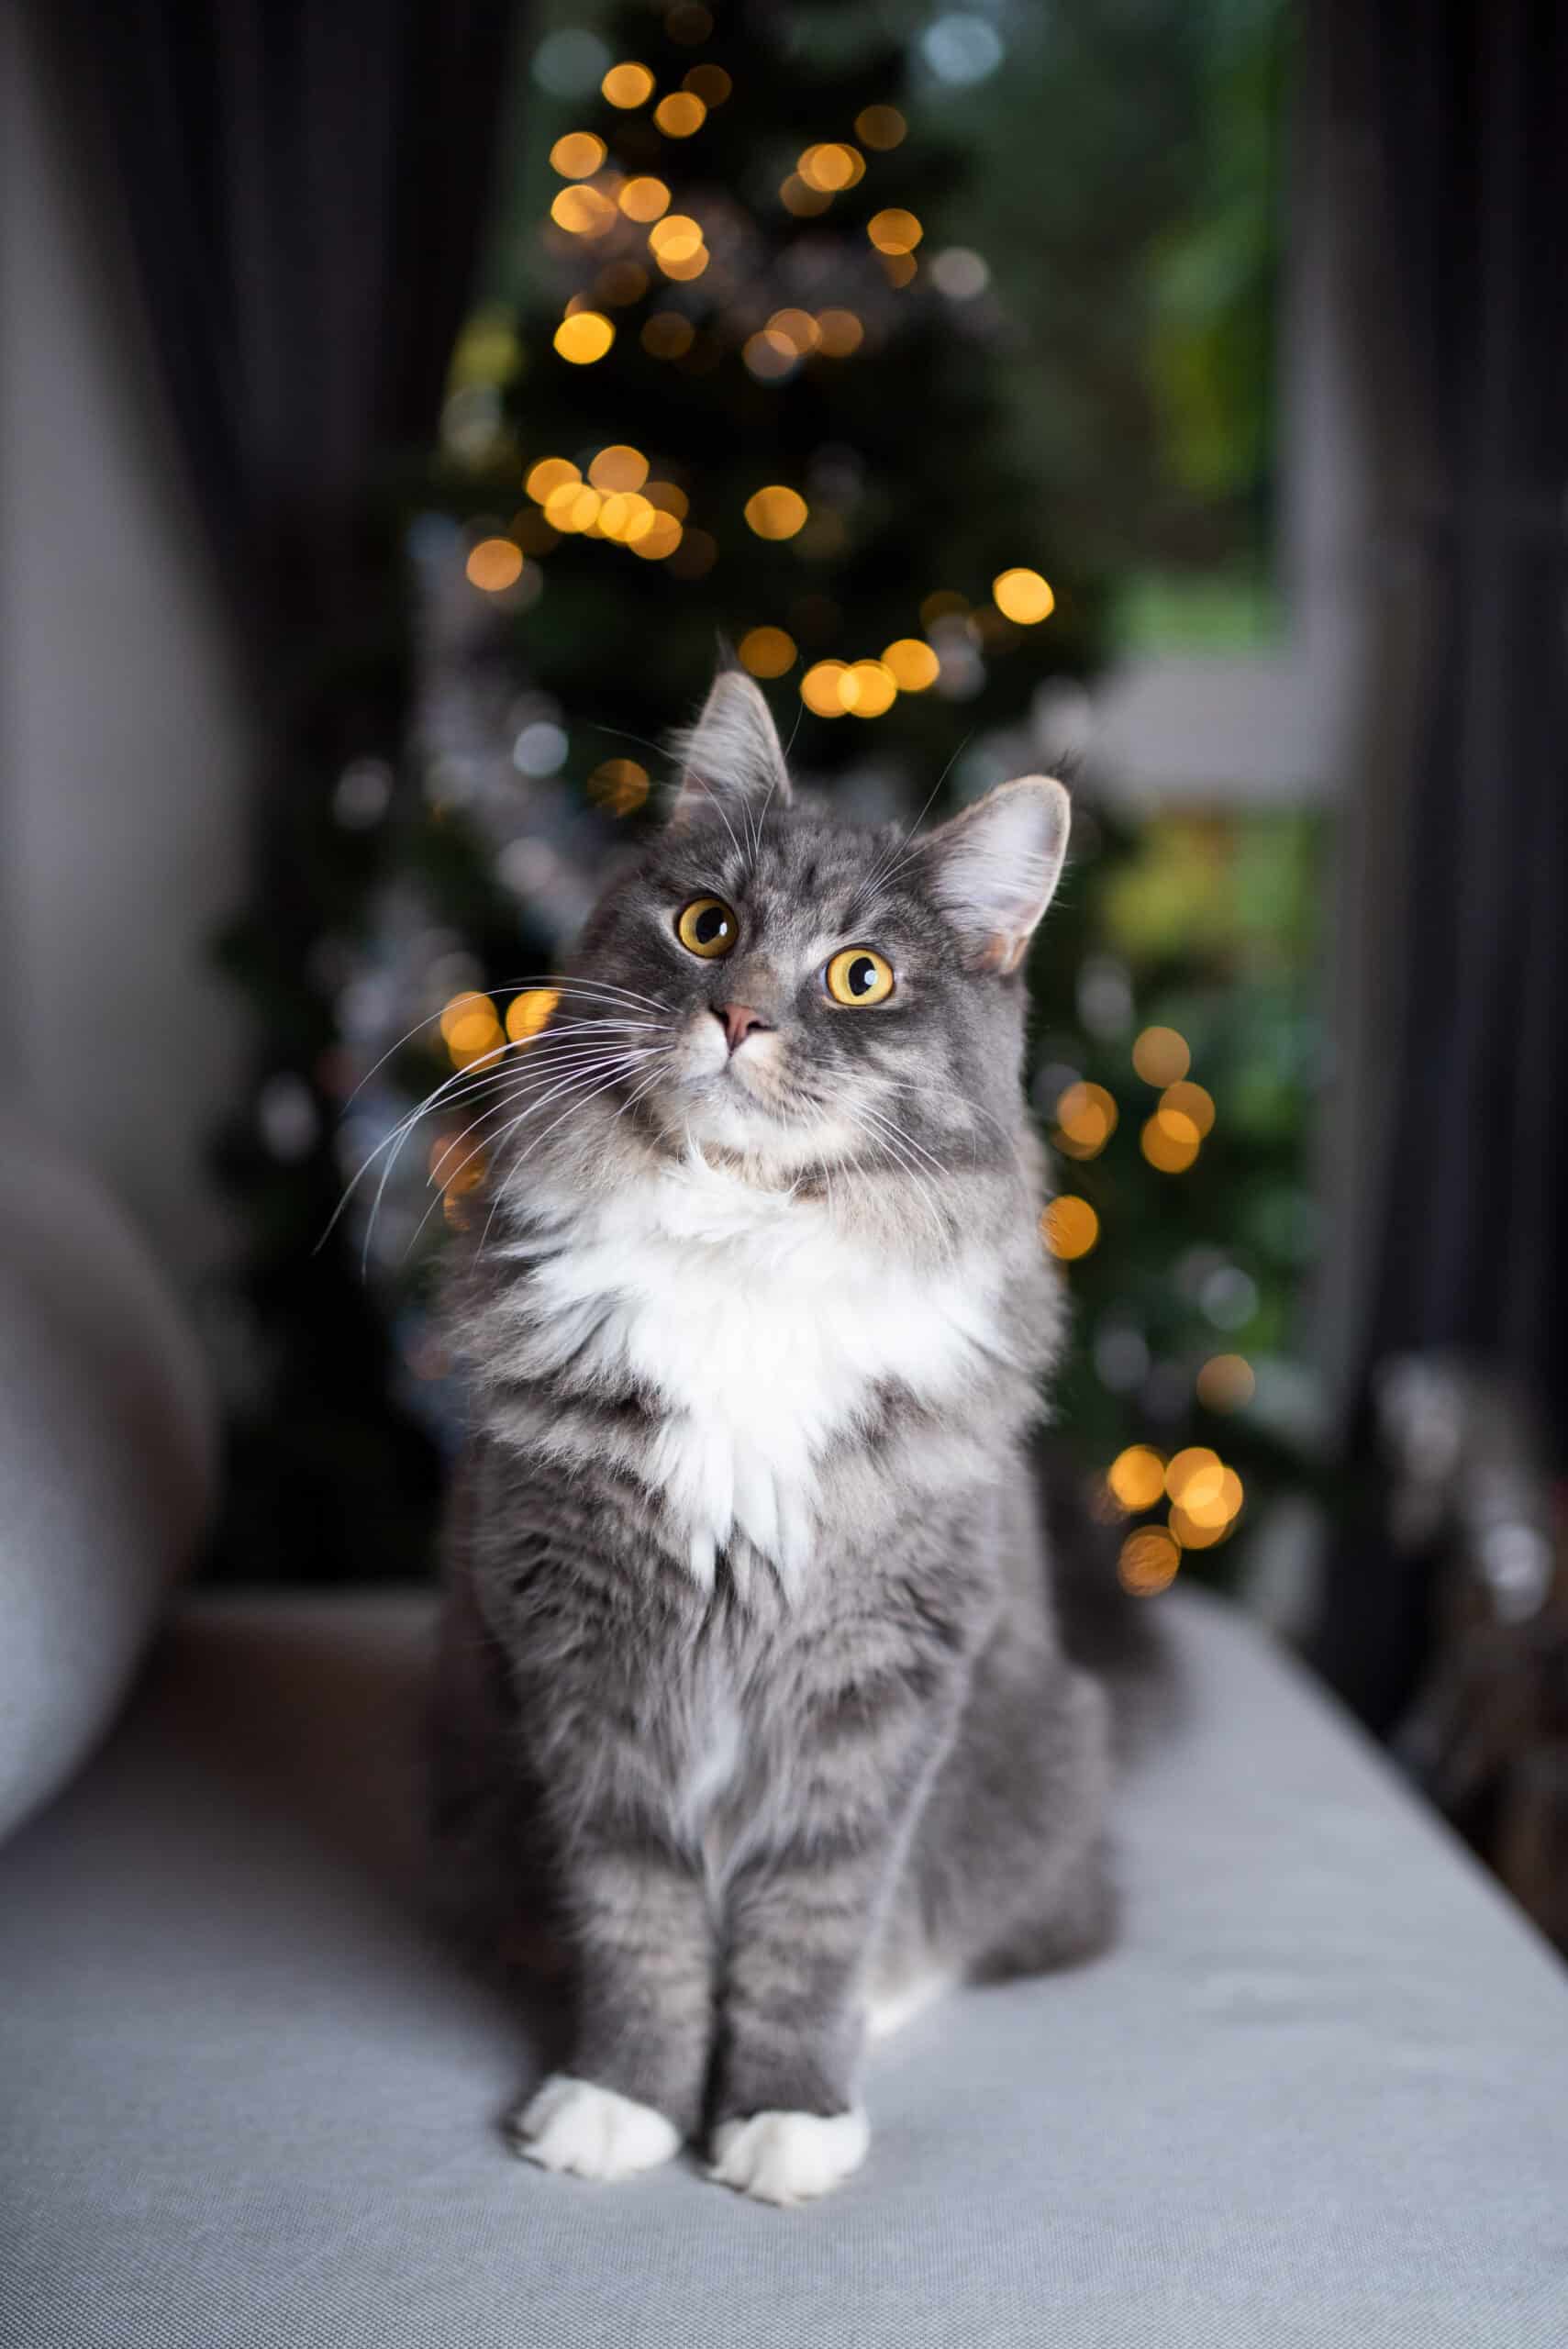 Grey and white cat sitting on a couch with lighted Christmas tree in the background